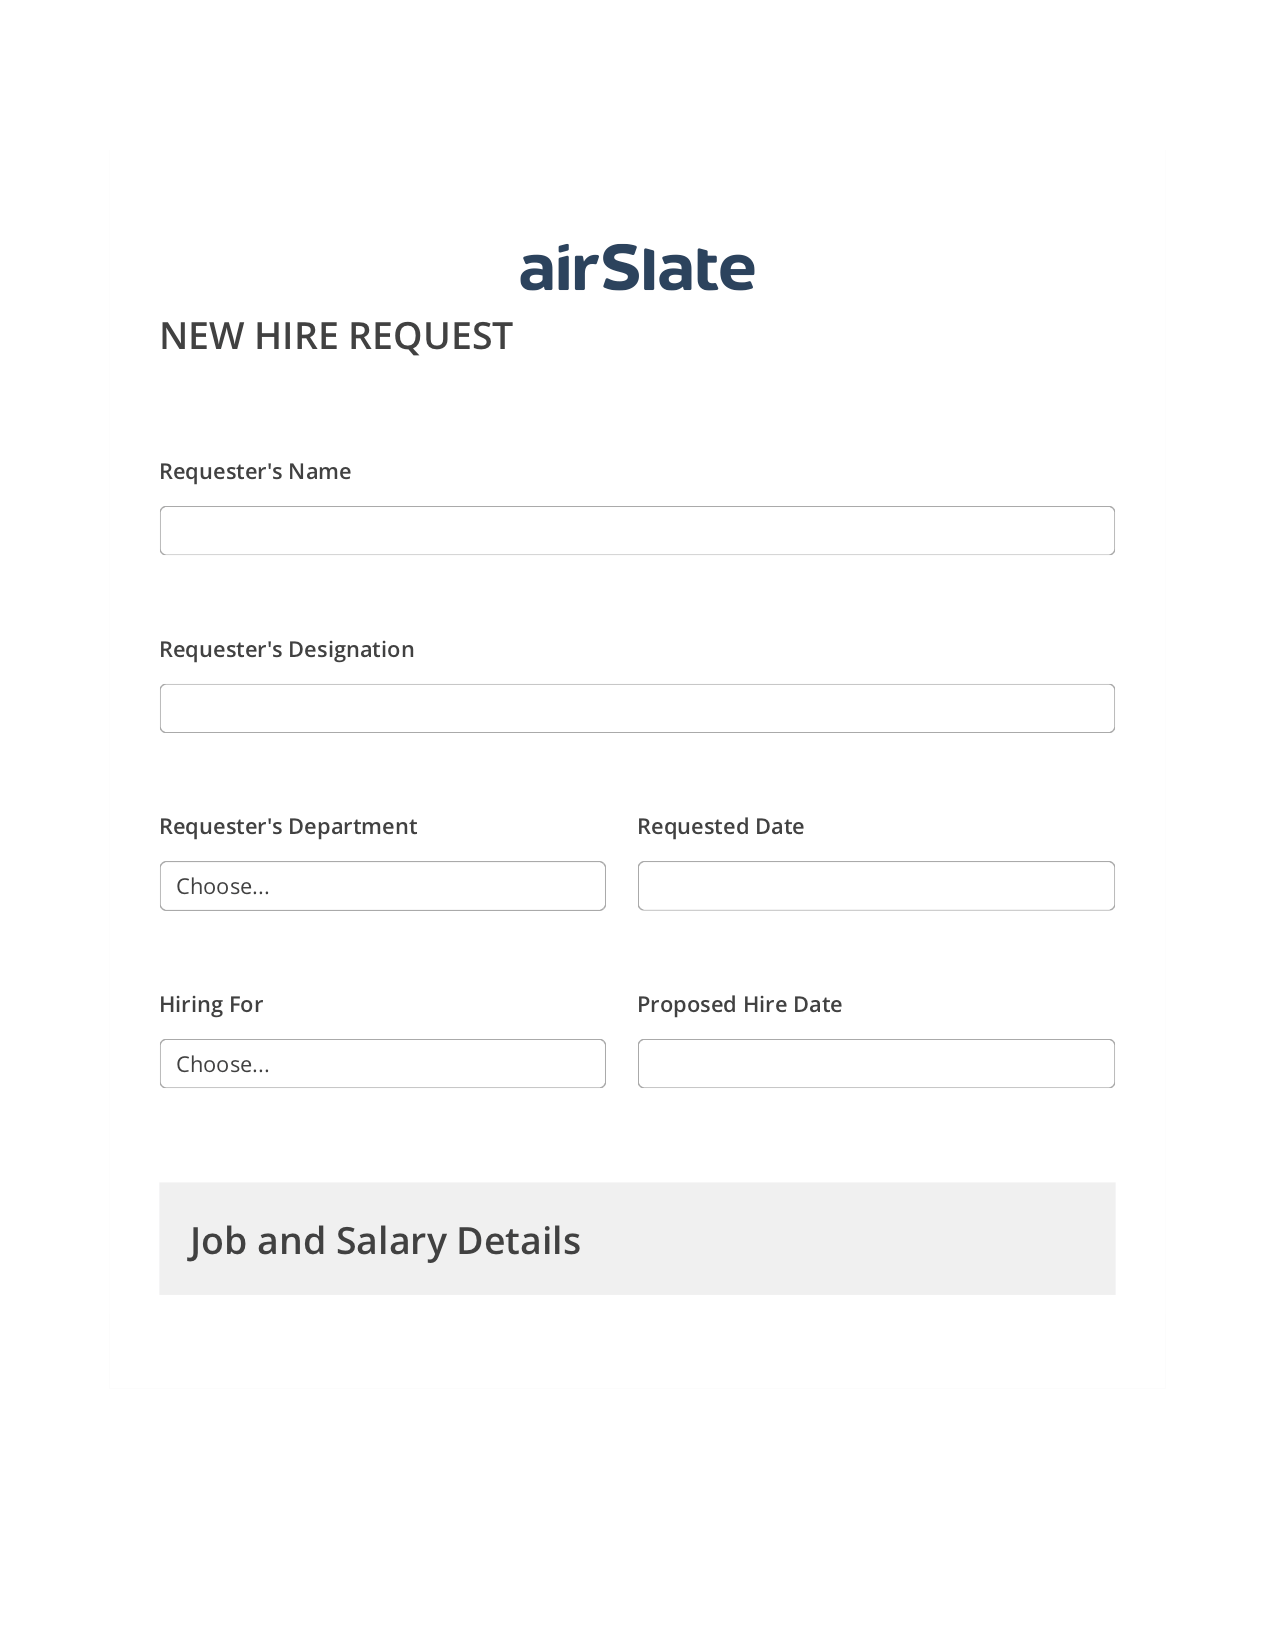 Hiring Request Workflow Pre-fill Dropdowns from Airtable, Update MS Dynamics 365 Record Bot, Archive to Box Bot